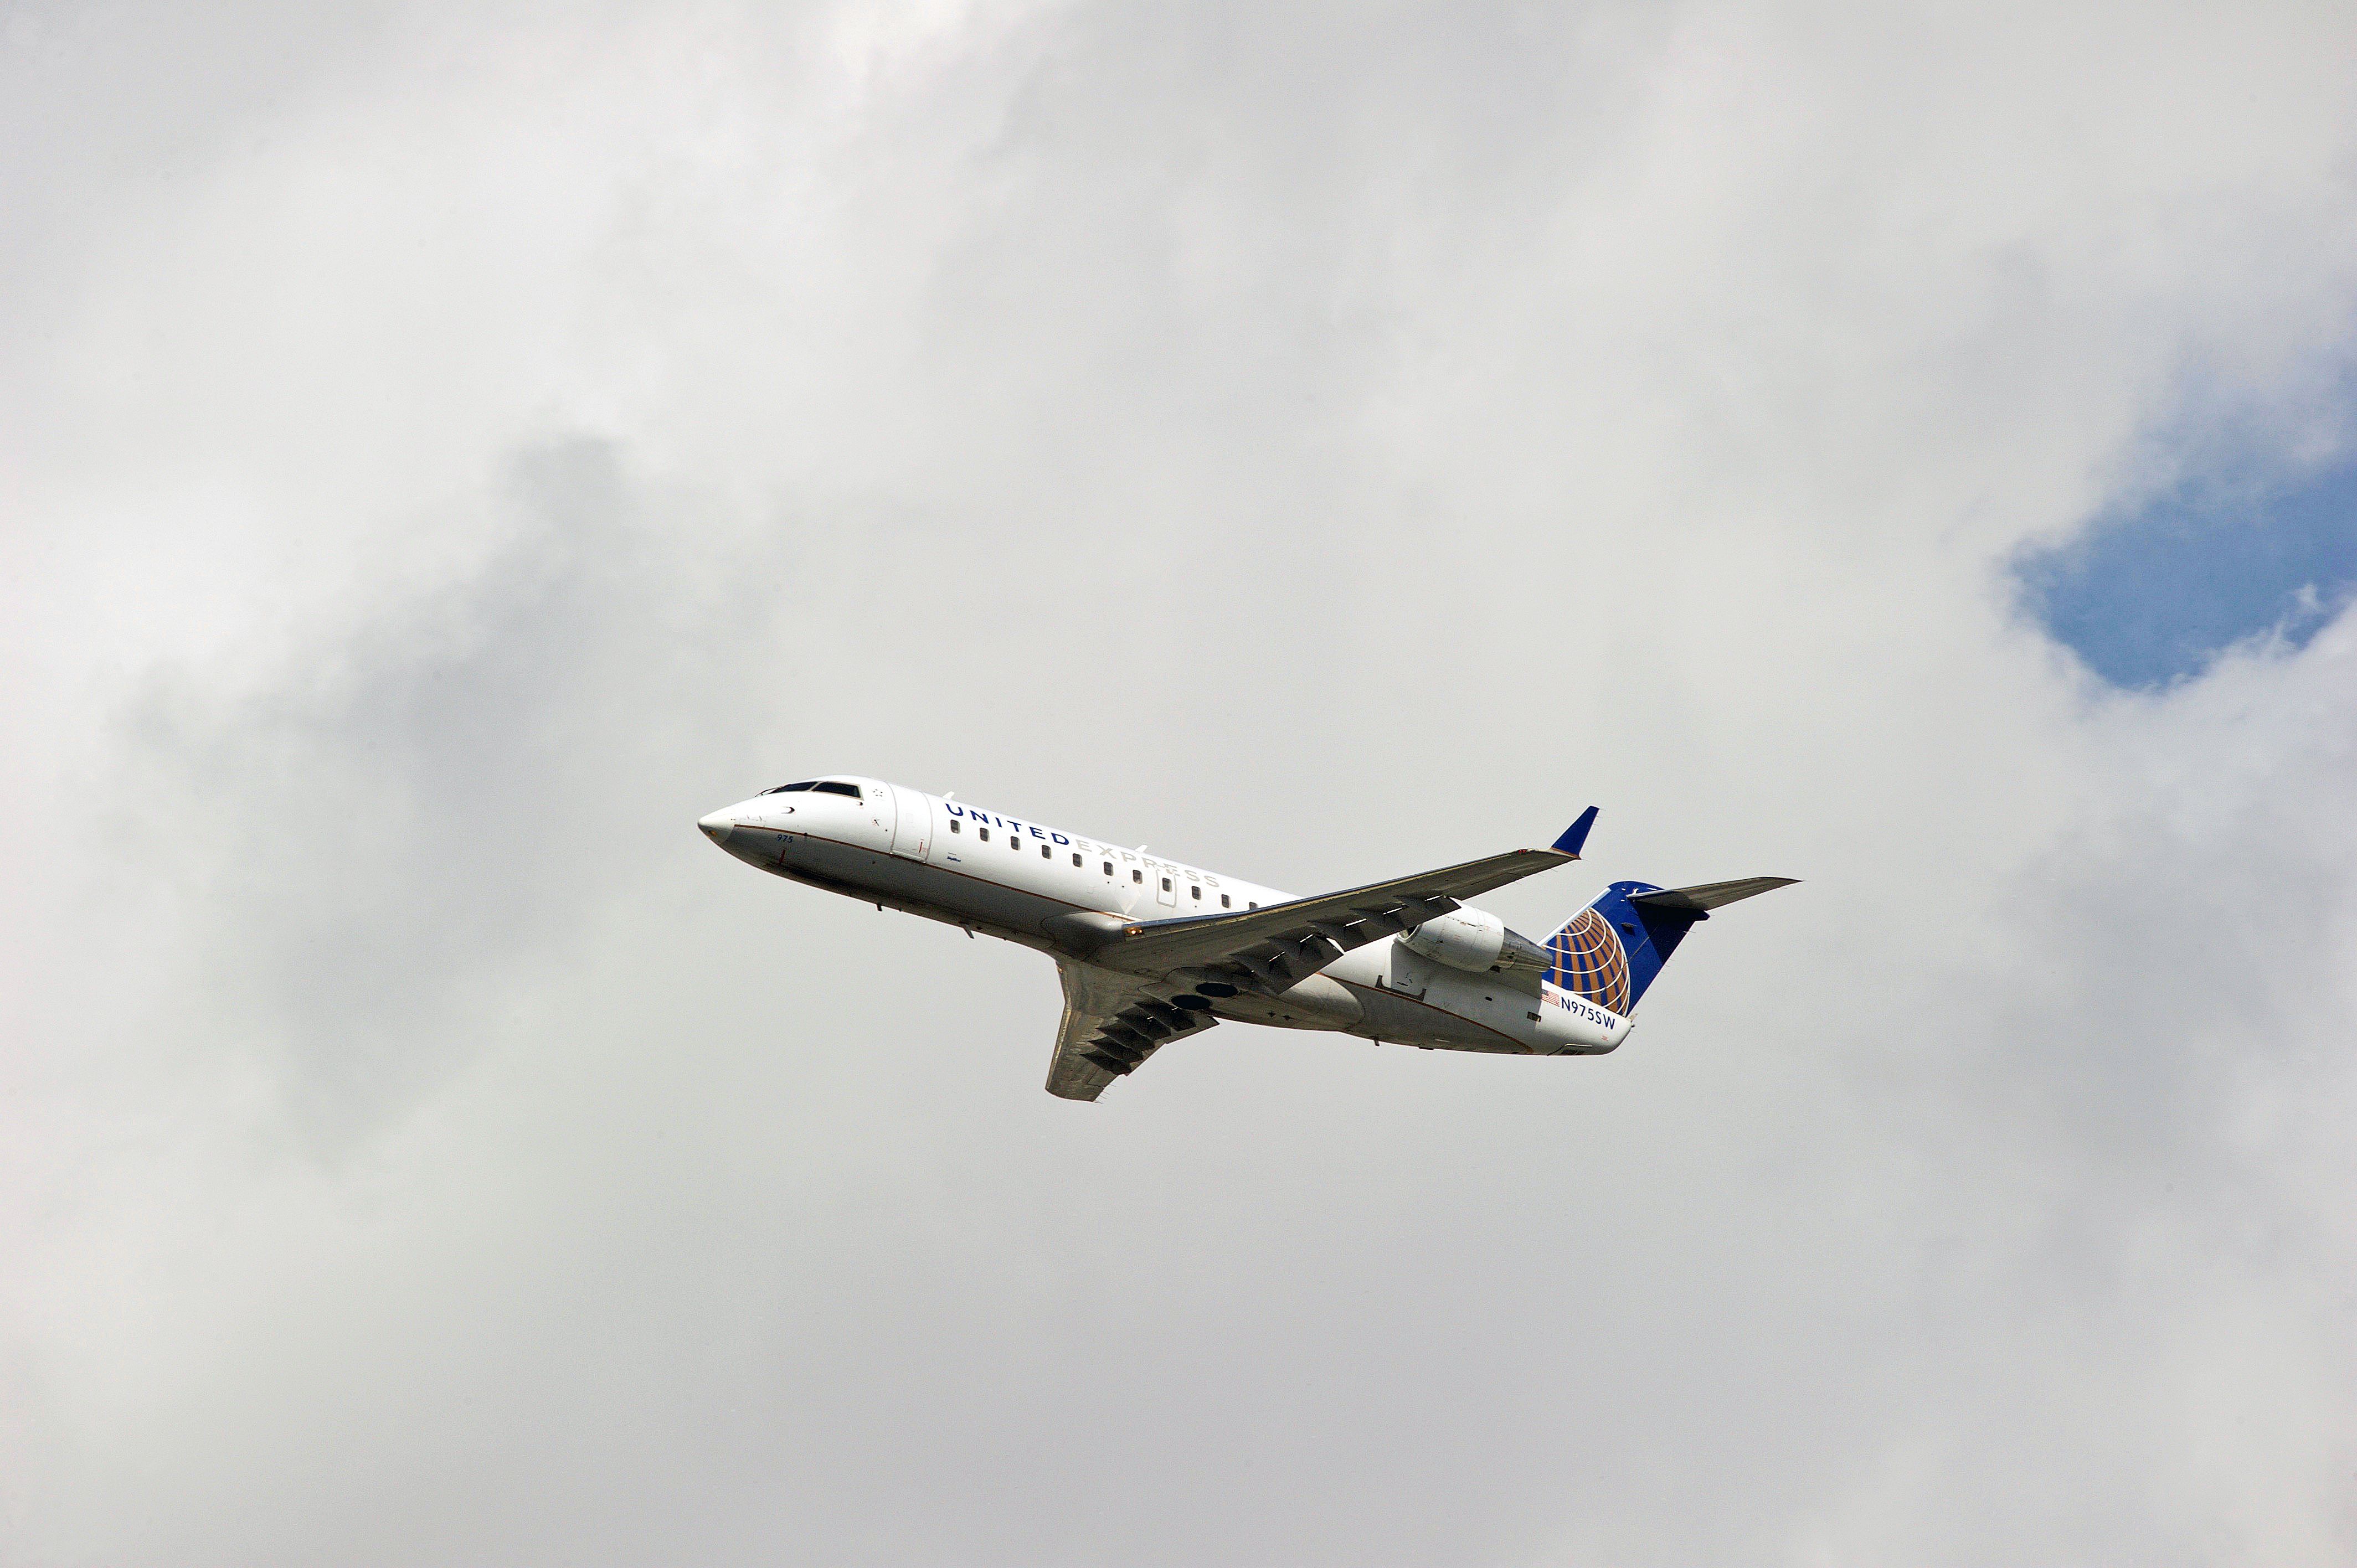 A United Express operated by SkyWest Airlines Bombardier CRJ-200ER aircraft departs Los Angeles International Airport.